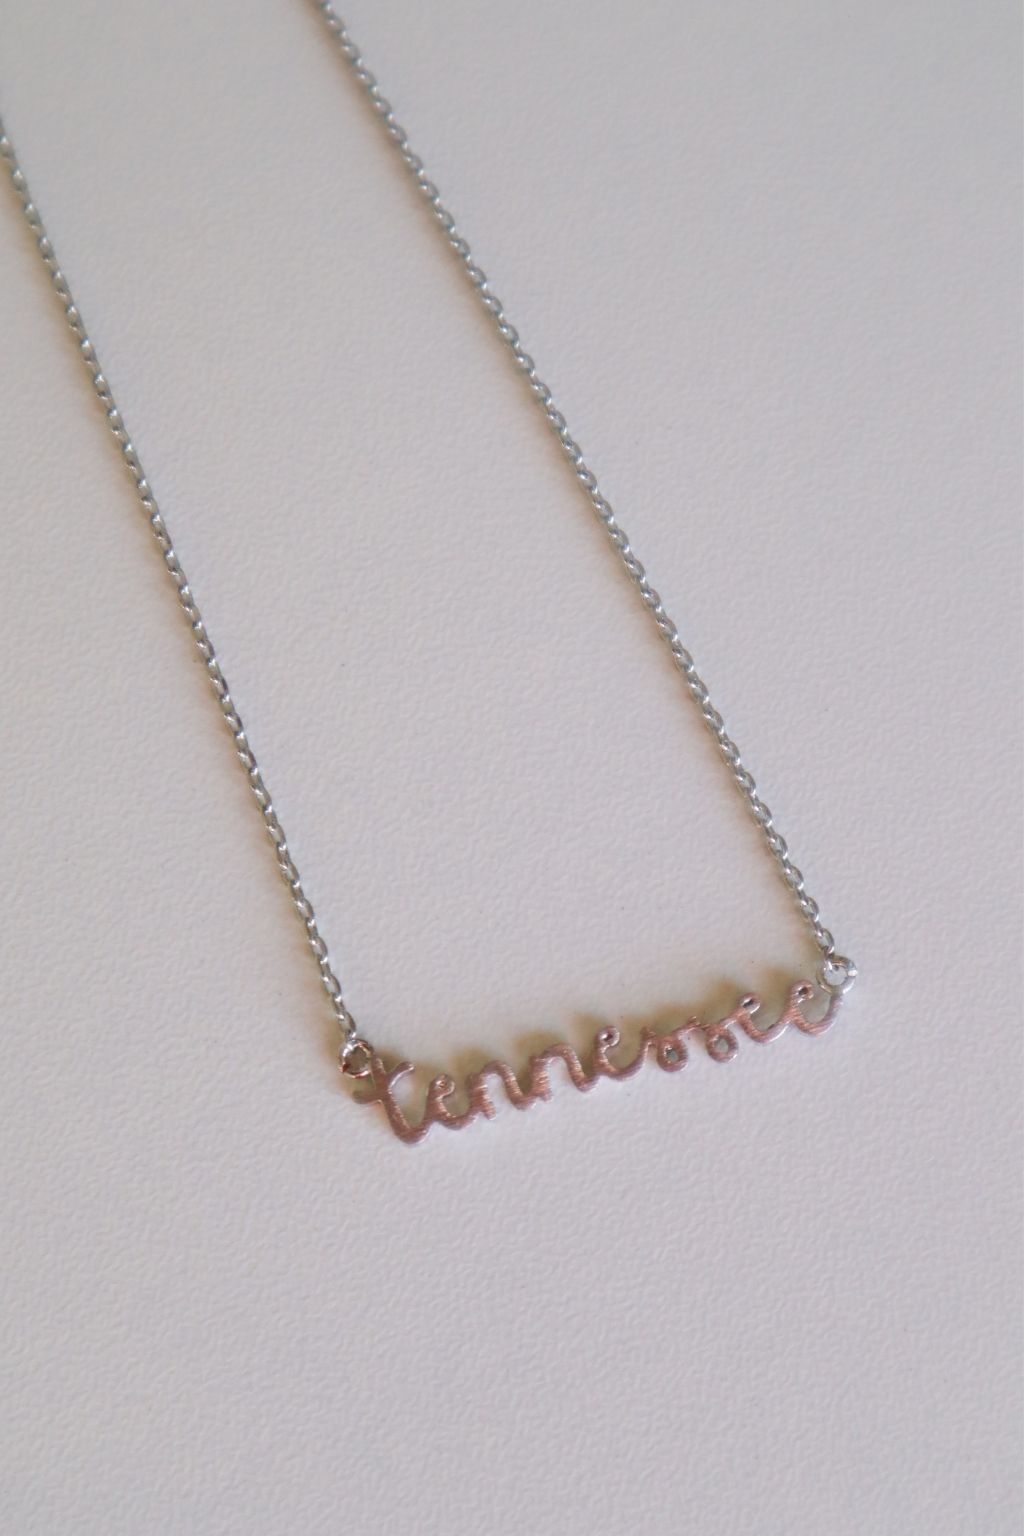 Tennessee Script Necklace Silver